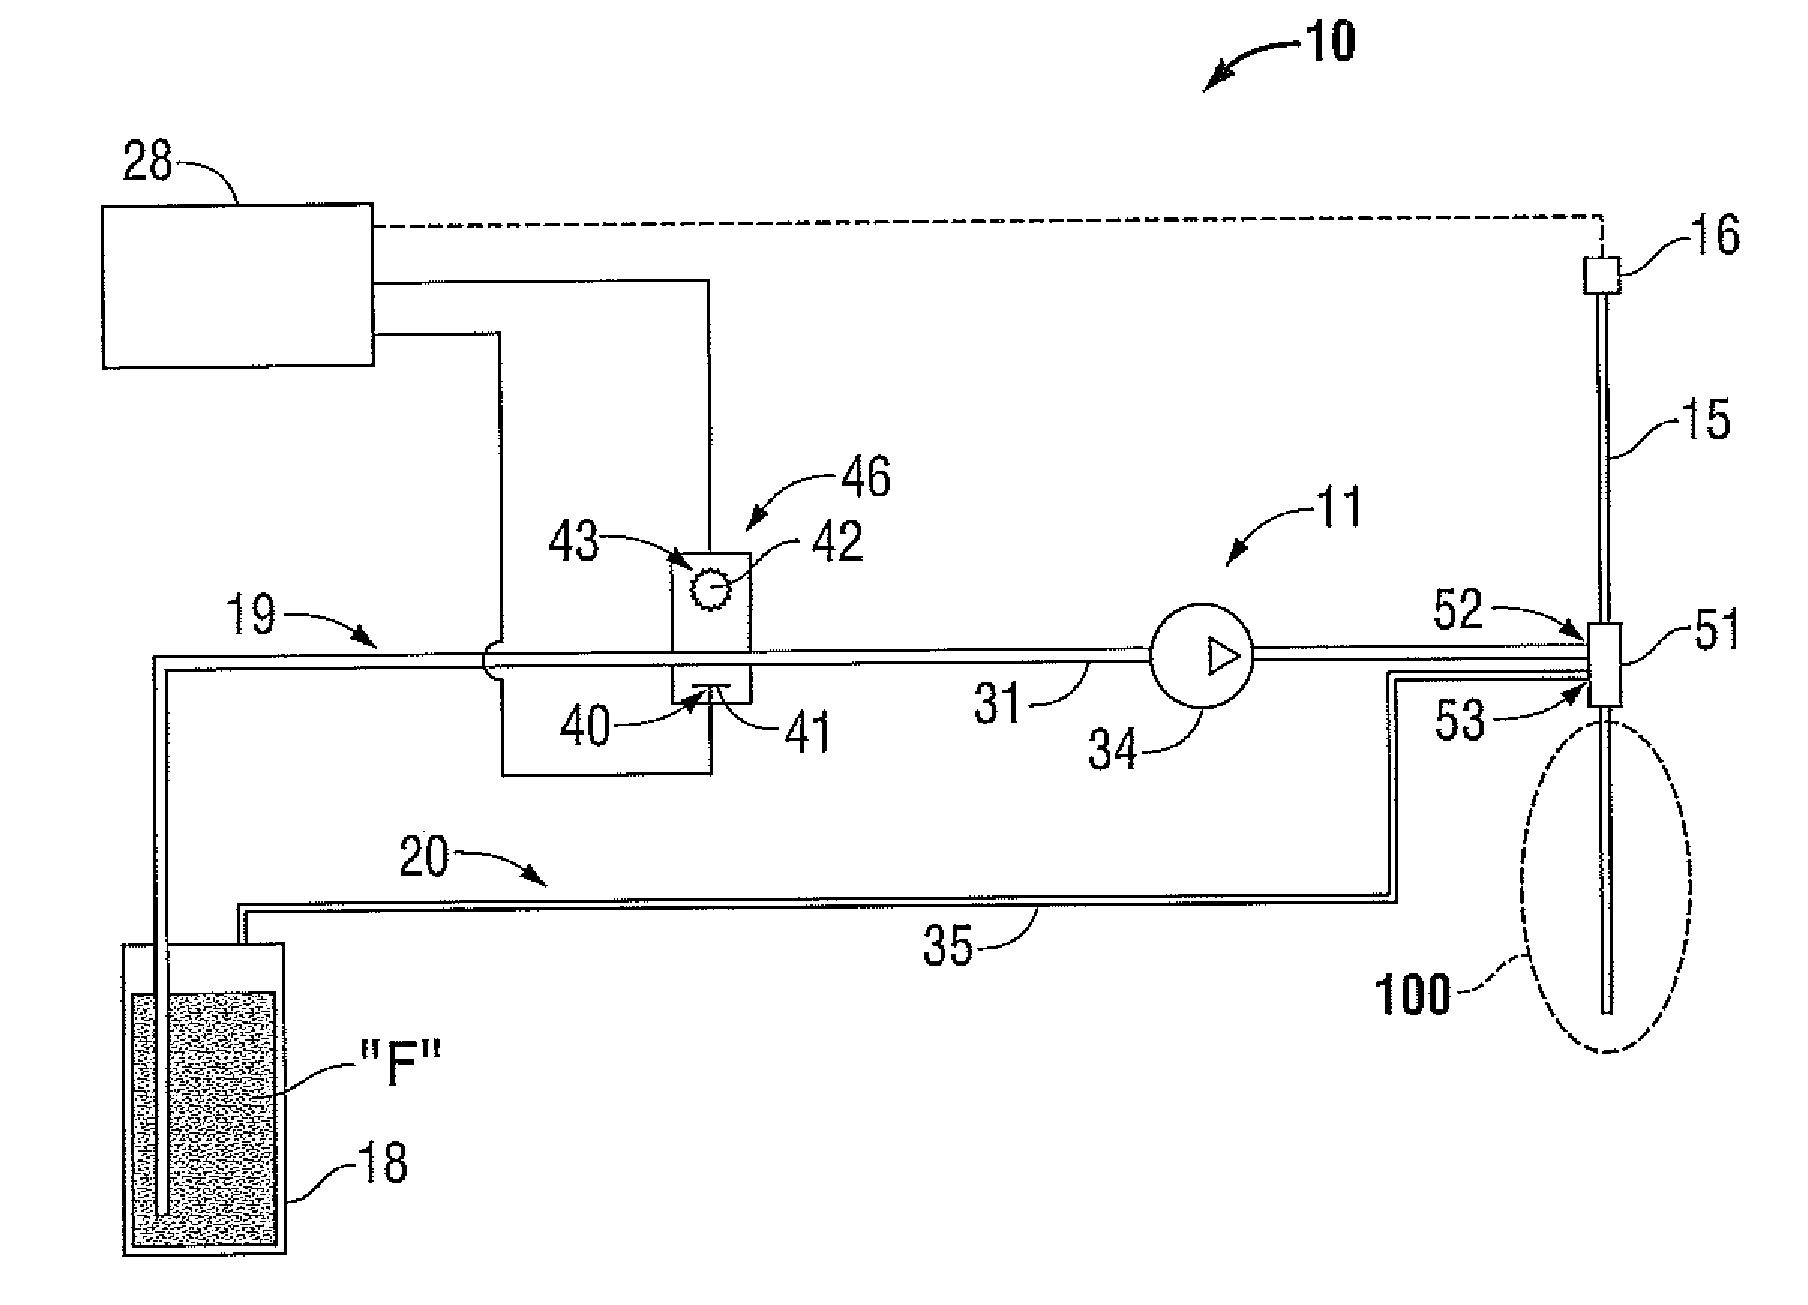 Optical Detection of Interrupted Fluid Flow to Ablation Probe